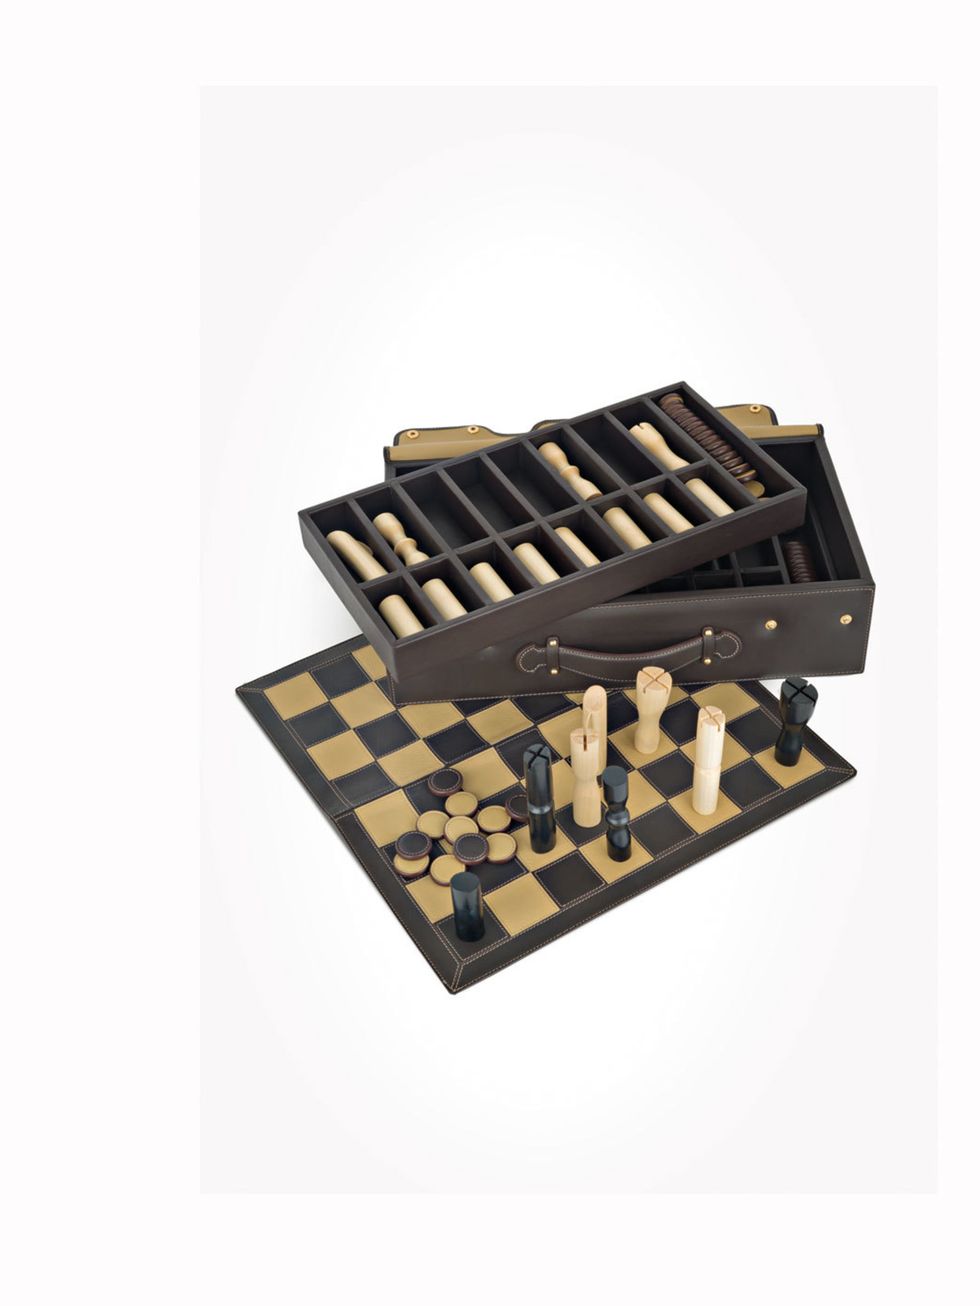 <p>You'll be too afraid to move a single chess piece once you know its' price! <a href="http://www.loewe.com/international/">Loewe</a> chess set, £2,005</p>